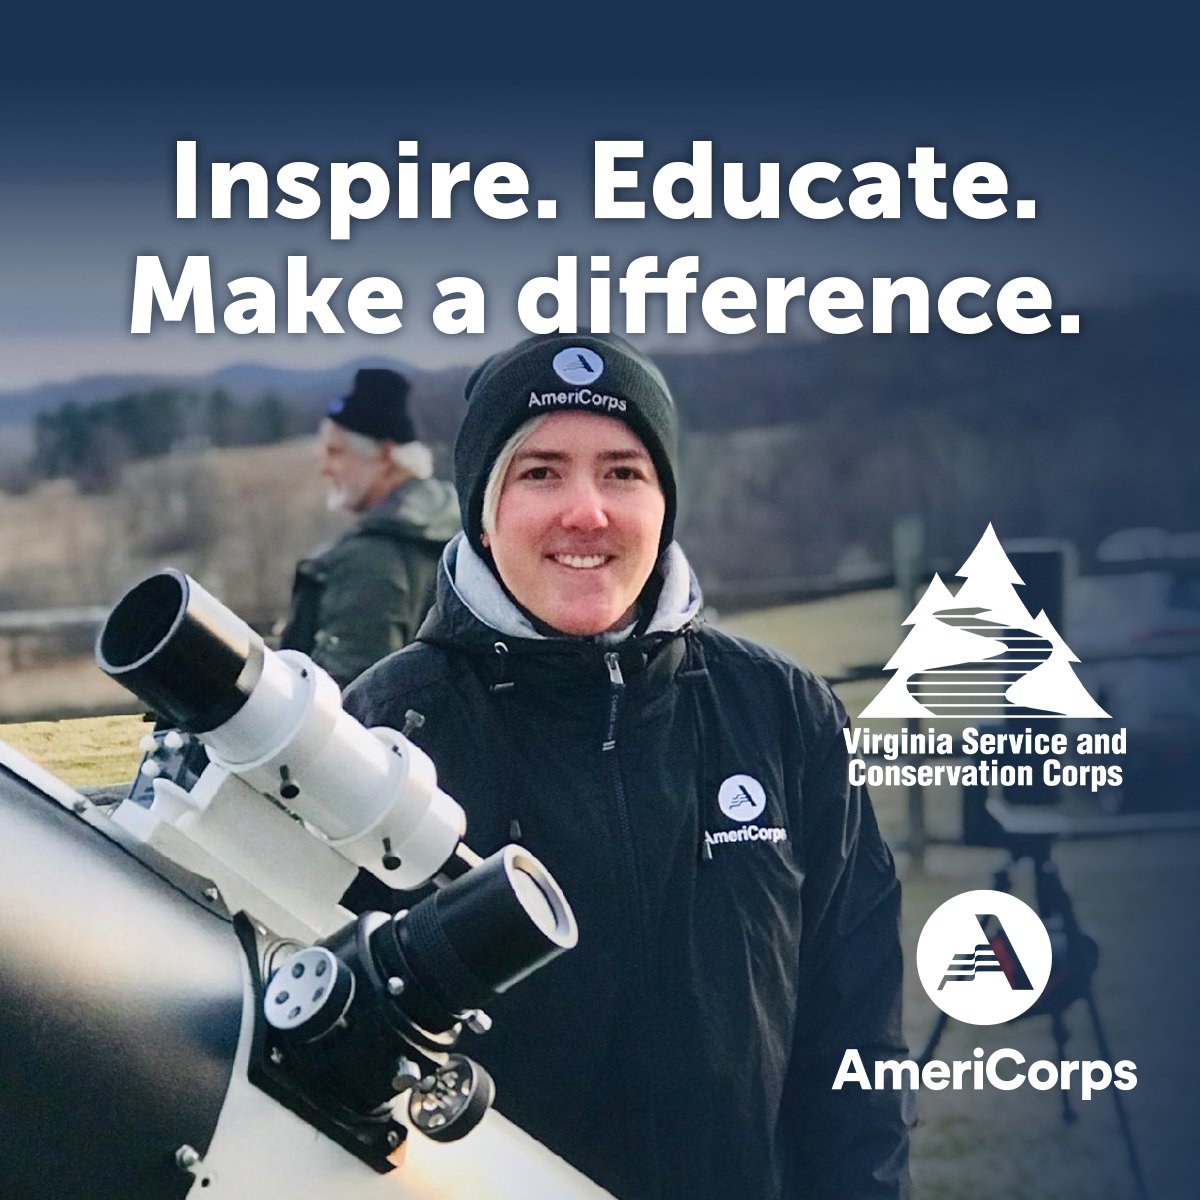 This week is your last chance to apply to join the Virginia Service and Conservation Corps, our #AmeriCorps program that gives you education, experience and stipend. Learn more and apply by April 12 at dcr.virginia.gov/state-parks/am….